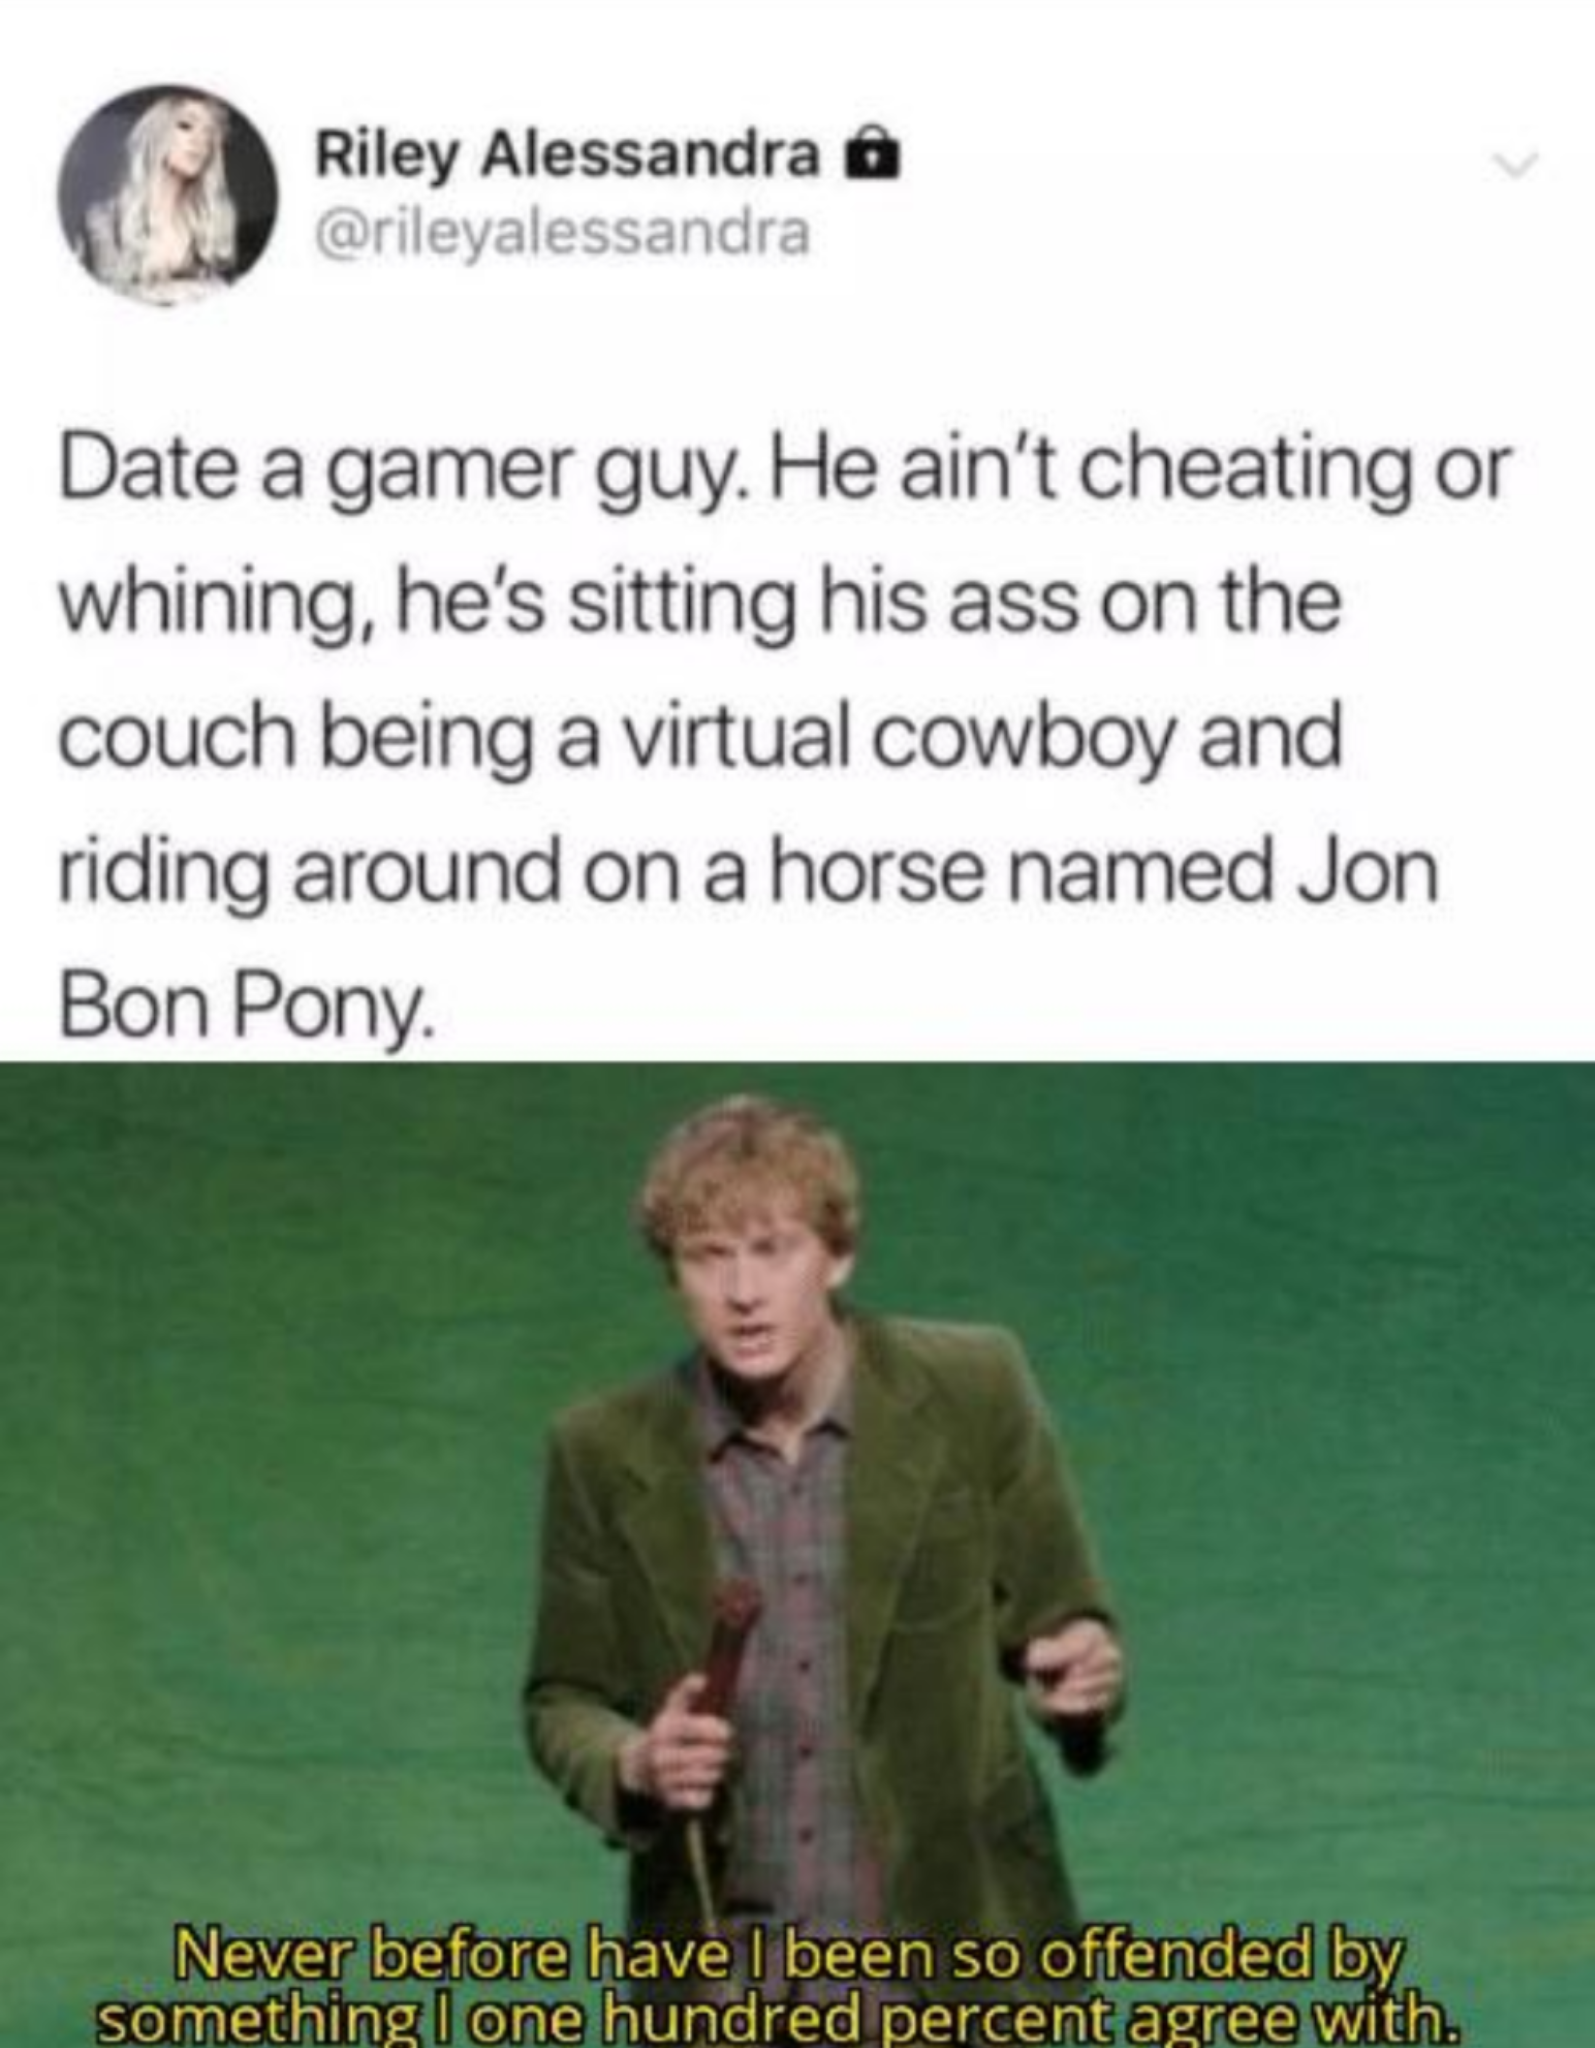 human behavior - Riley Alessandra Date a gamer guy. He ain't cheating or whining, he's sitting his ass on the couch being a virtual cowboy and riding around on a horse named Jon Bon Pony Never before have I been so offended by something one hundred percen